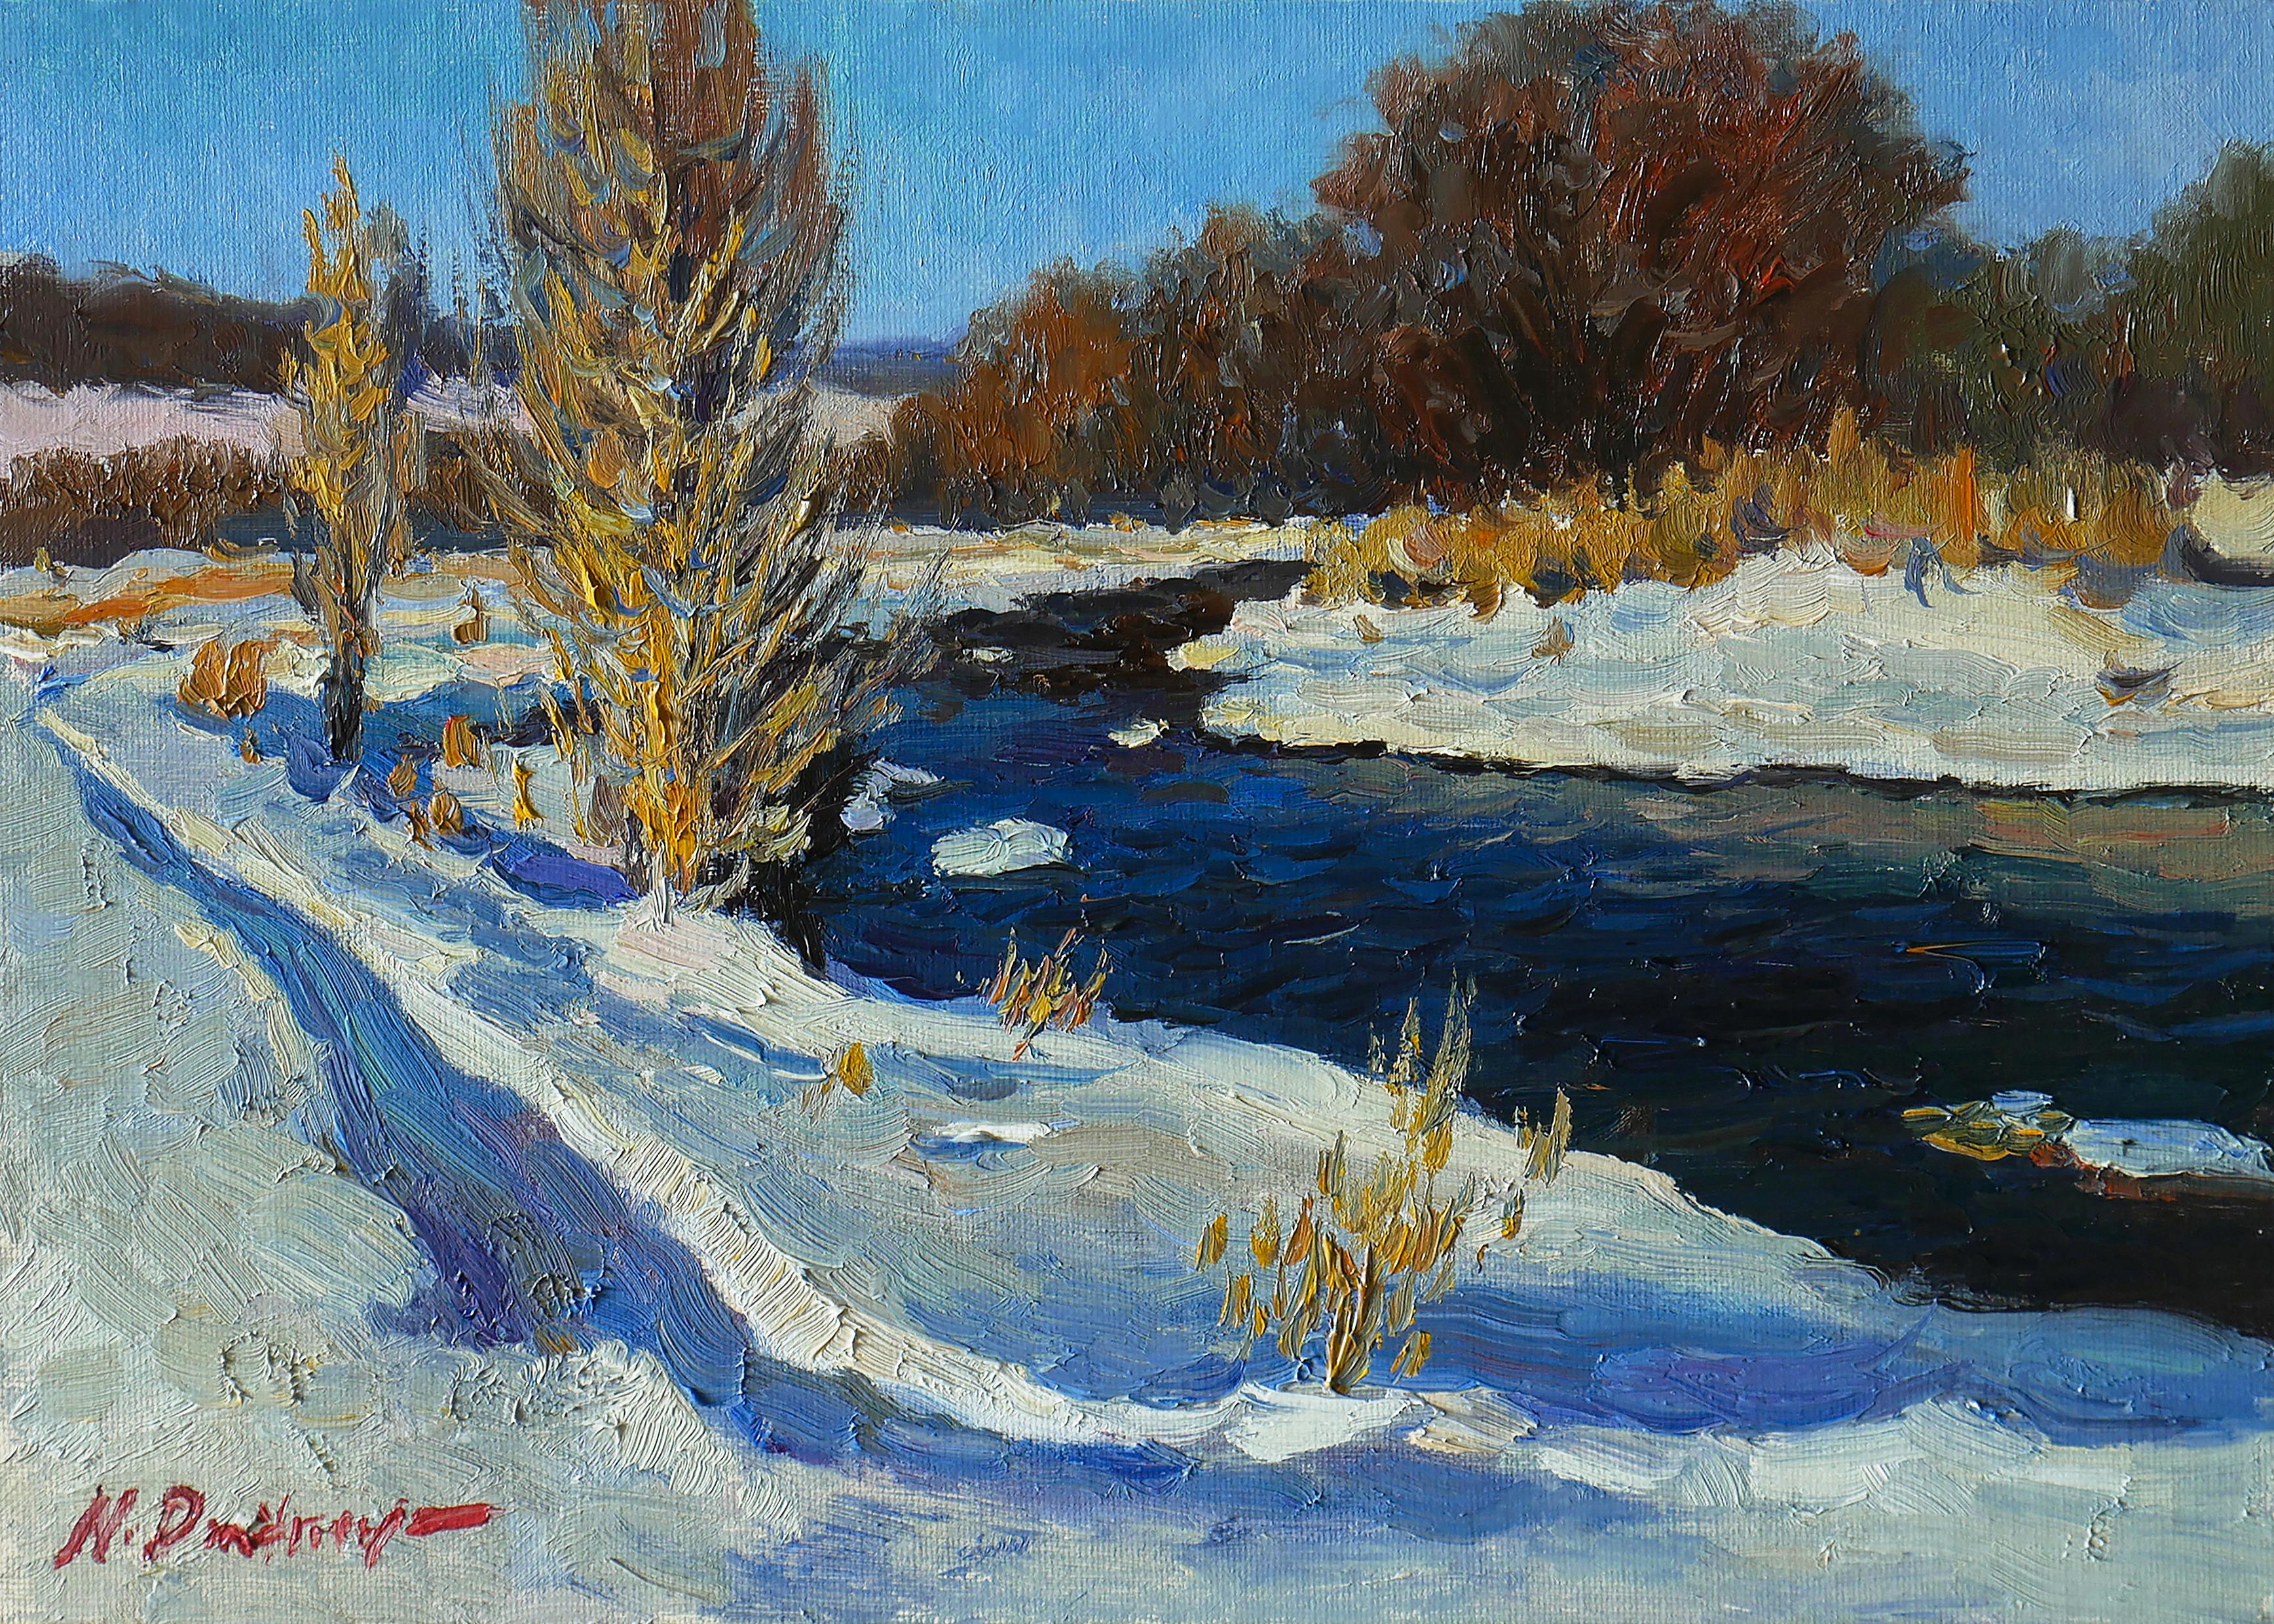 Nikolay Dmitriev Landscape Painting - The Sunny Winter Day At The Elchik - landscape painting